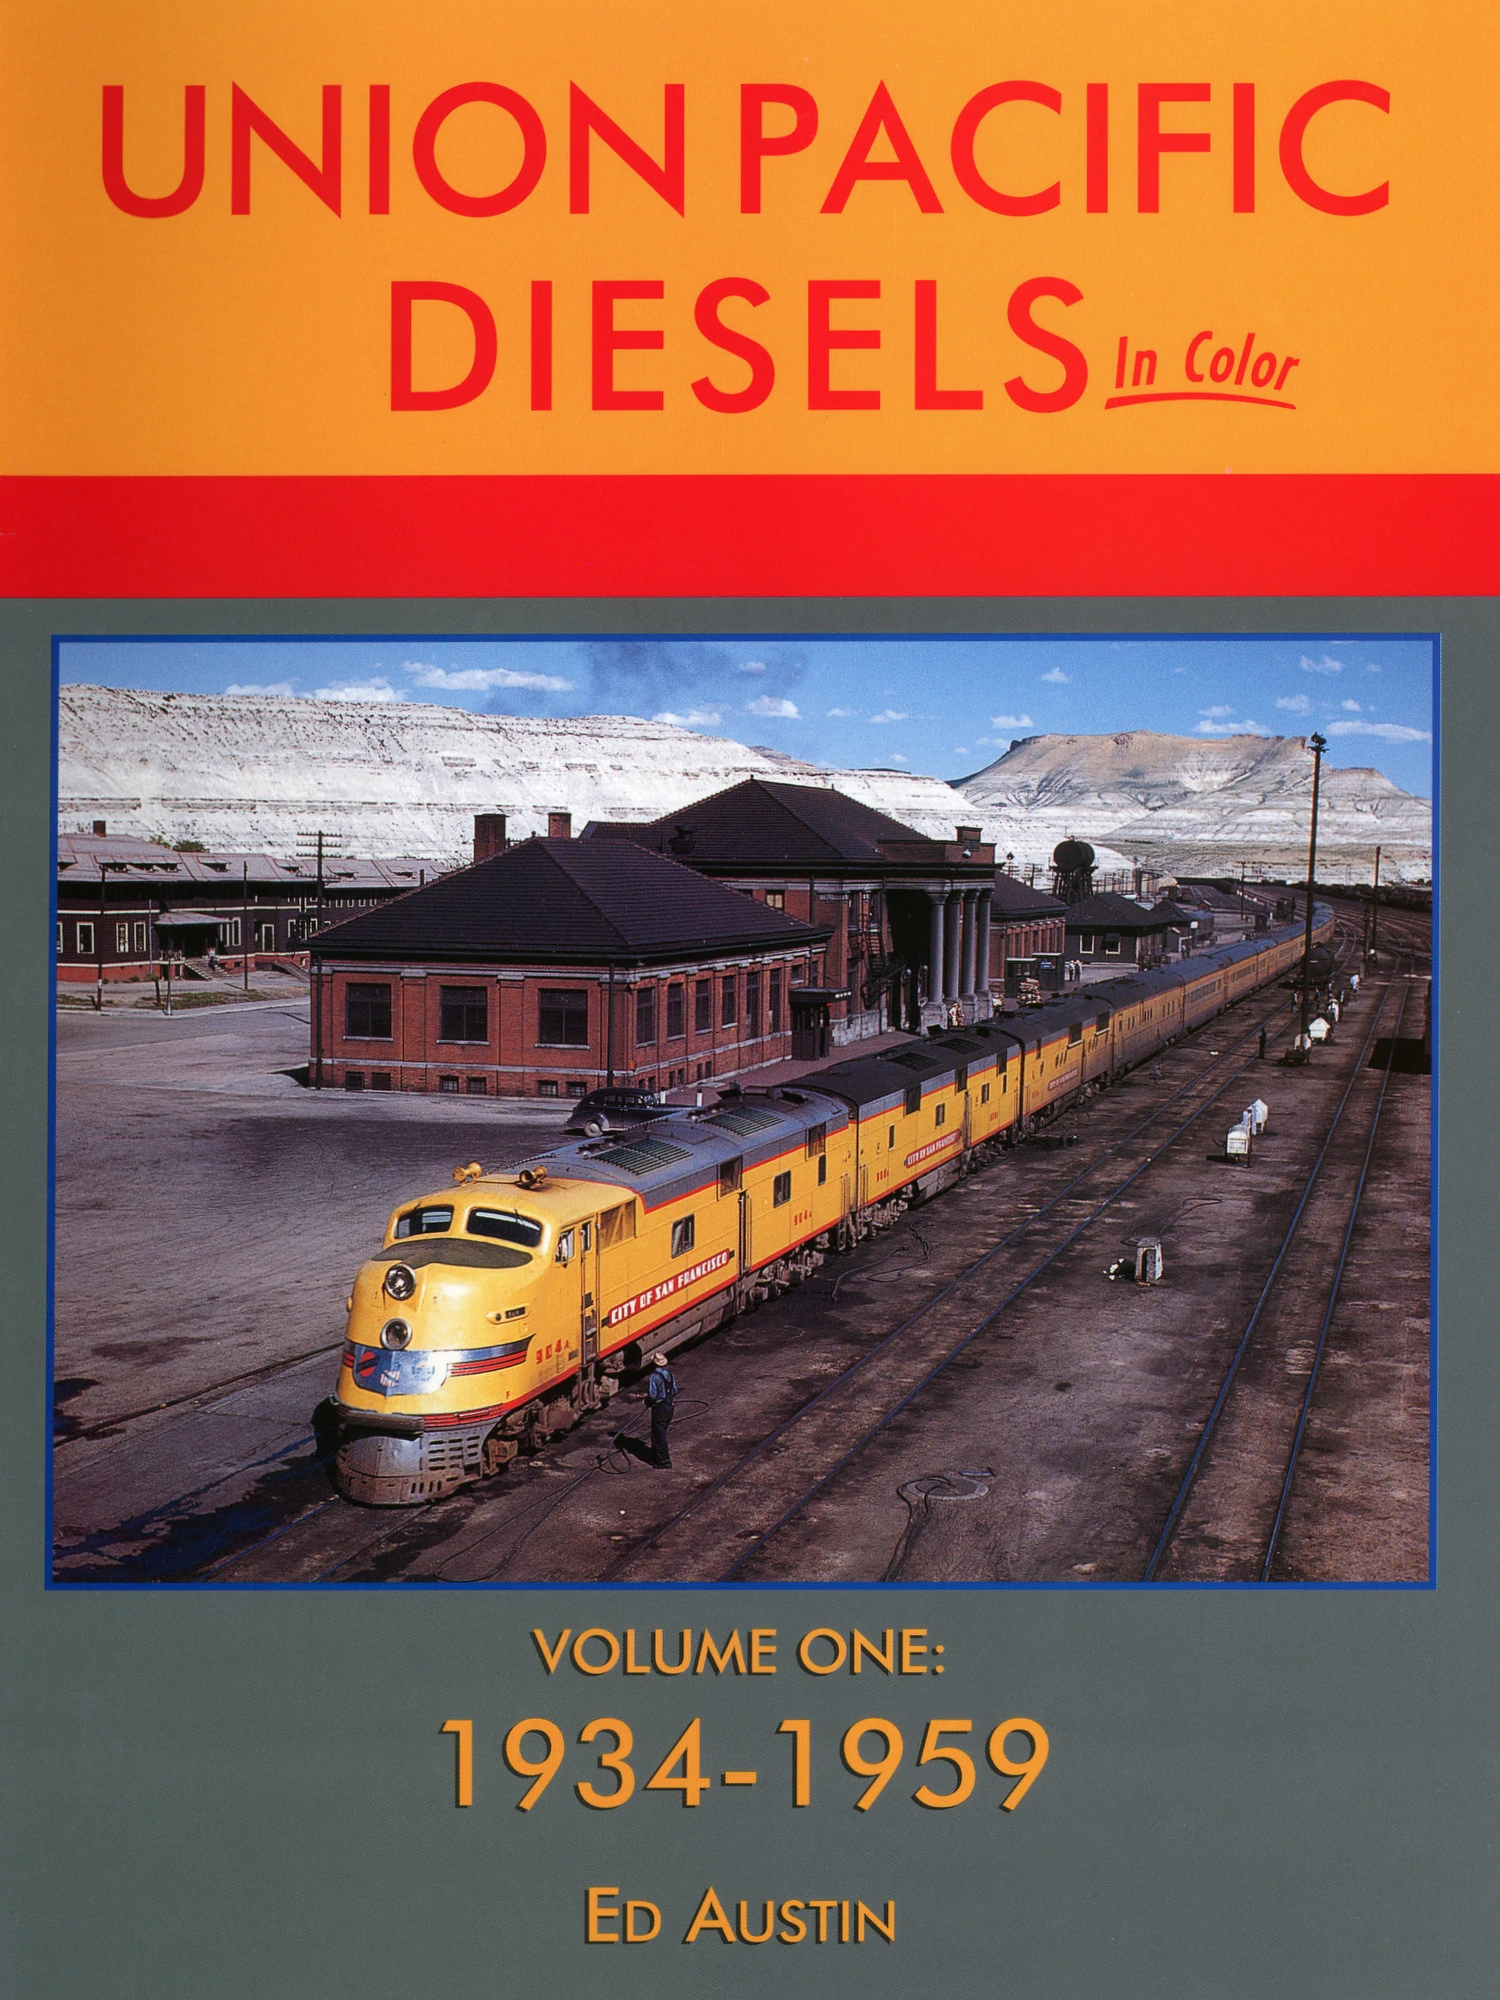 Union Pacific Diesels In Color Volume 1 1934-1959